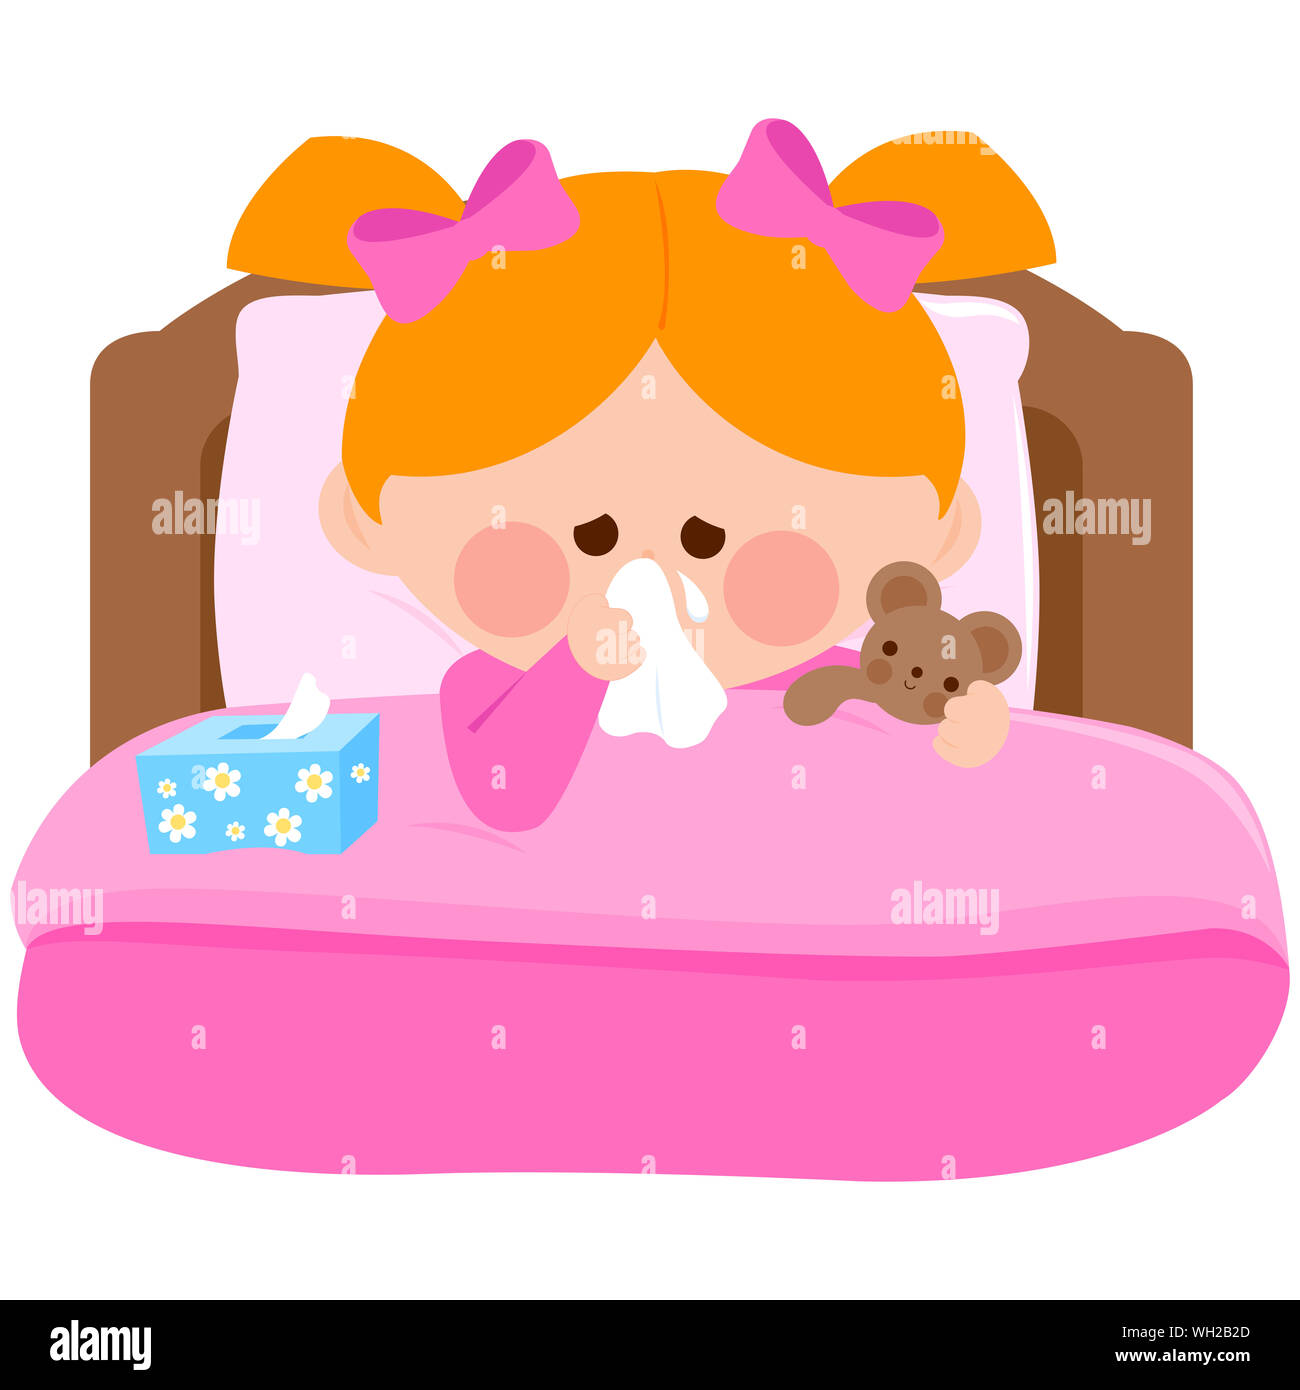 Little girl blowing her nose lying sick in bed and holding her teddy bear toy. Stock Photo